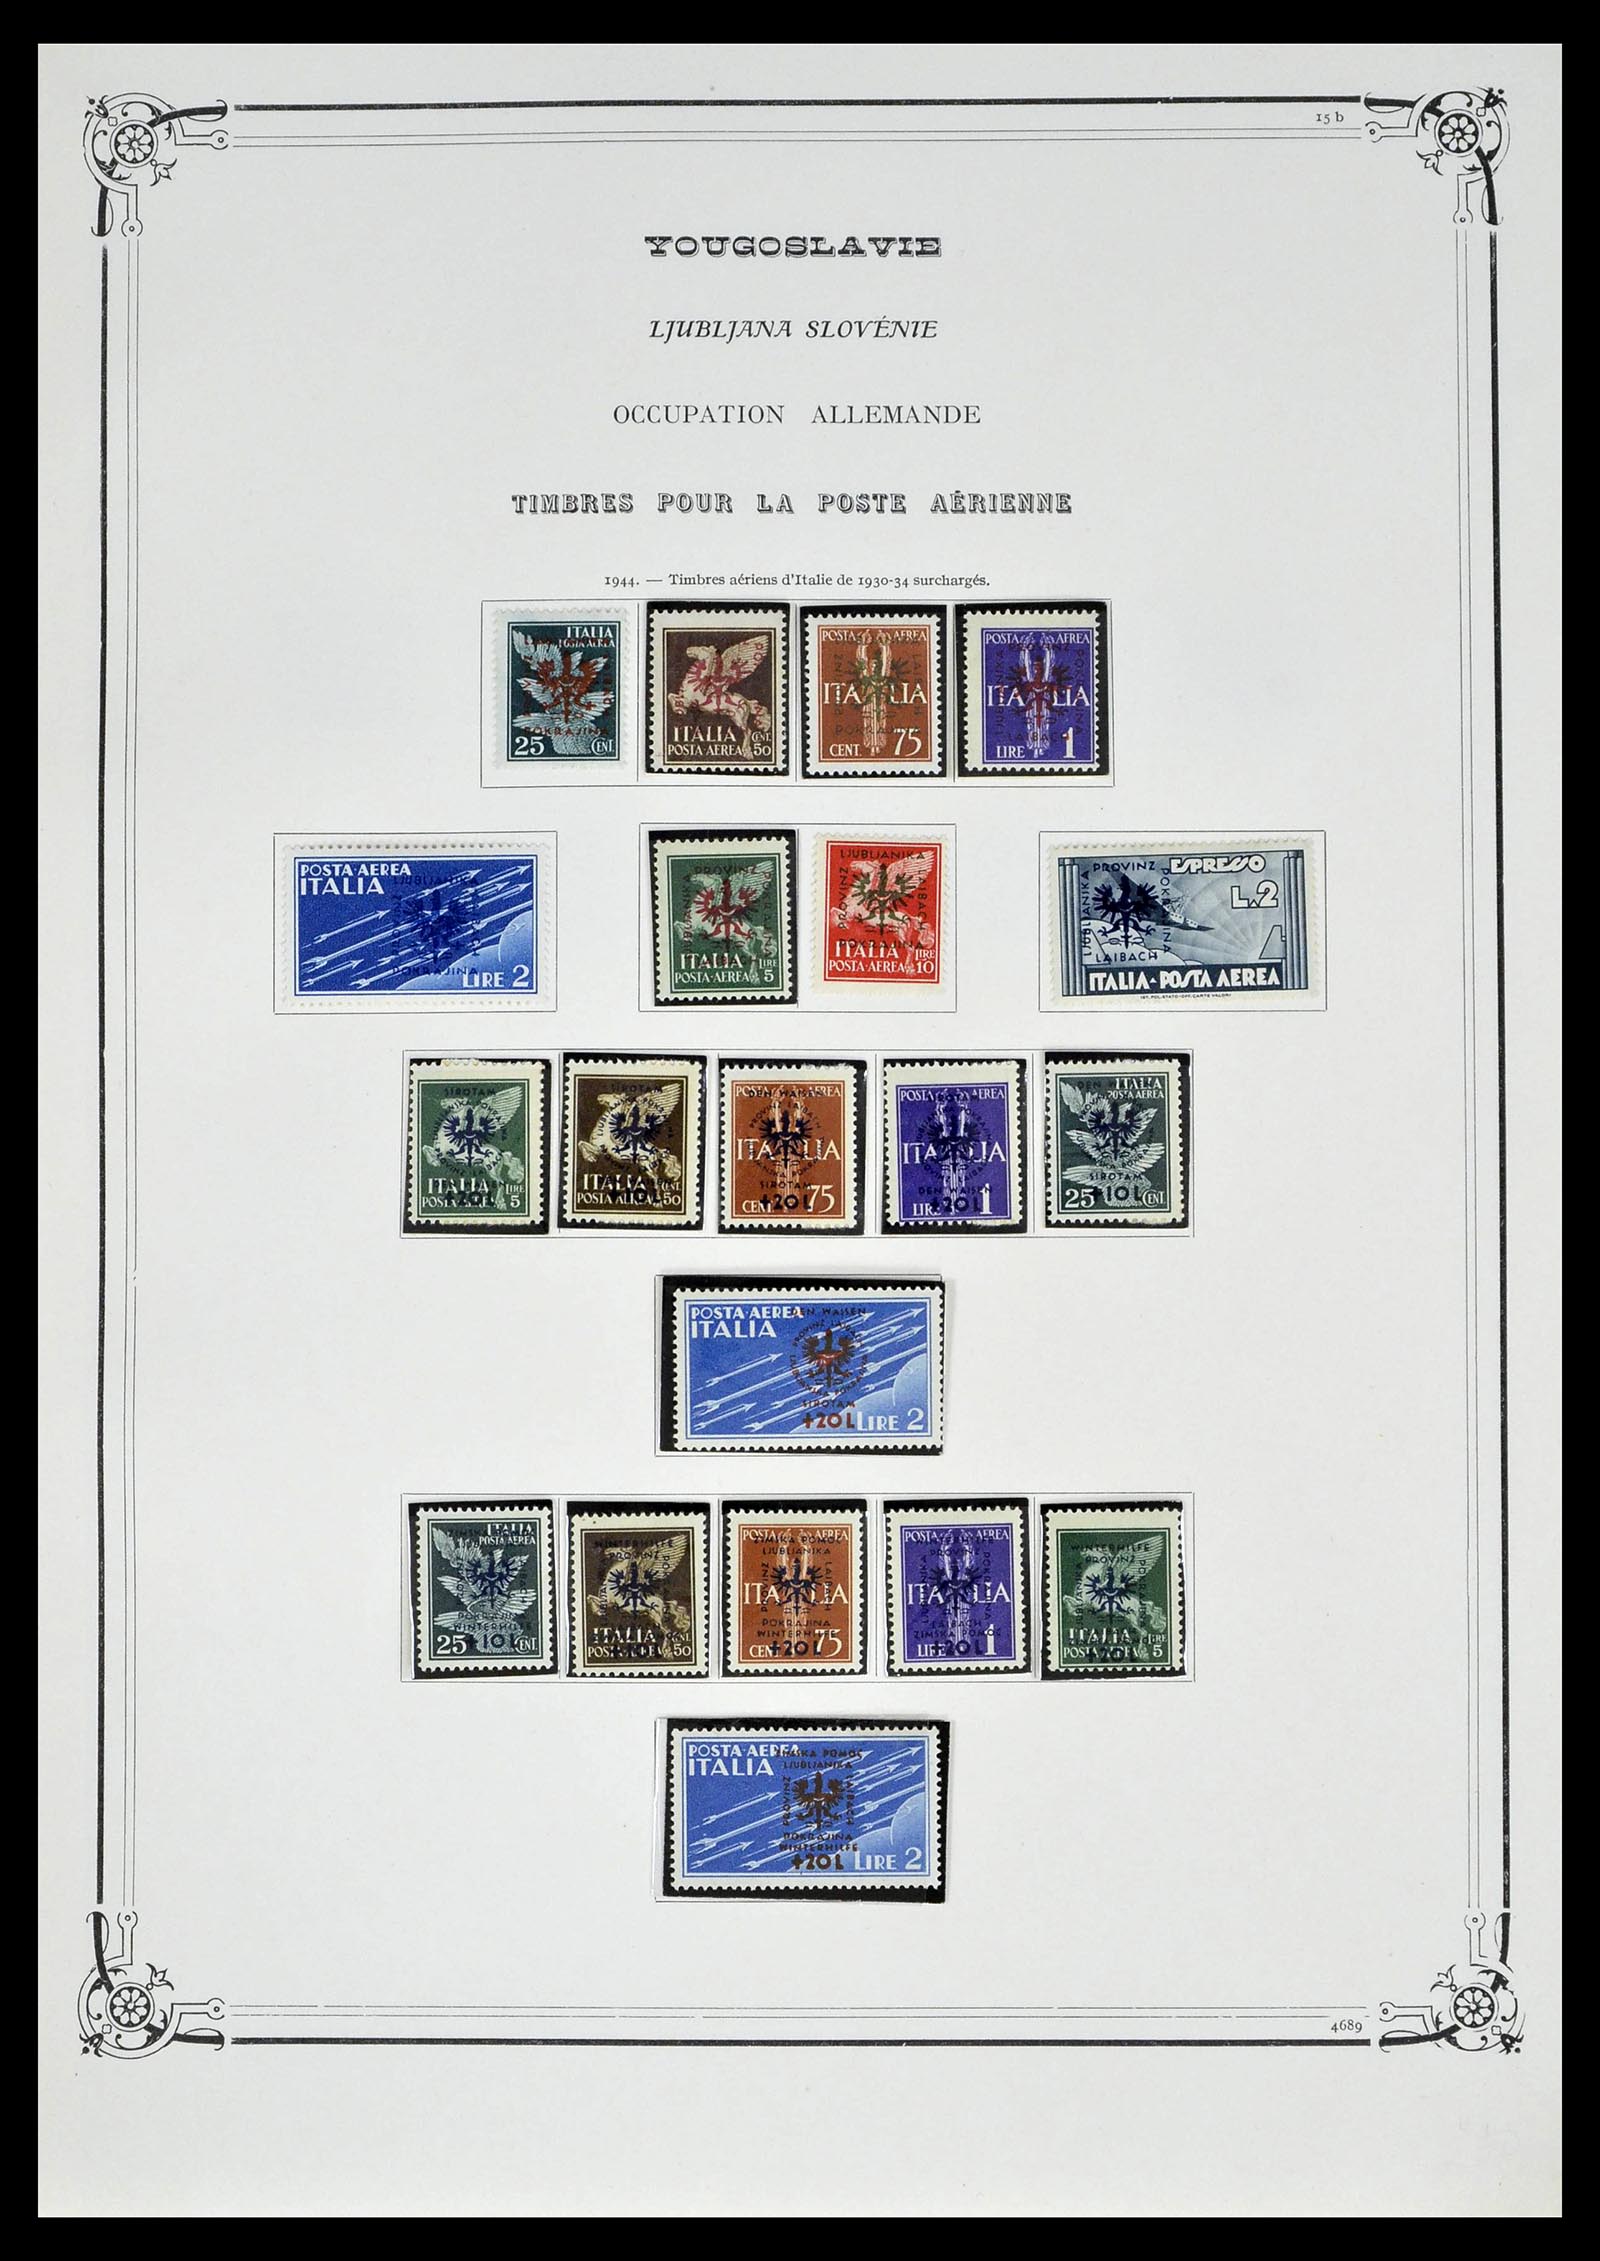 39290 0006 - Stamp collection 39290 Italian and German occupation of Lubljana 1941-19